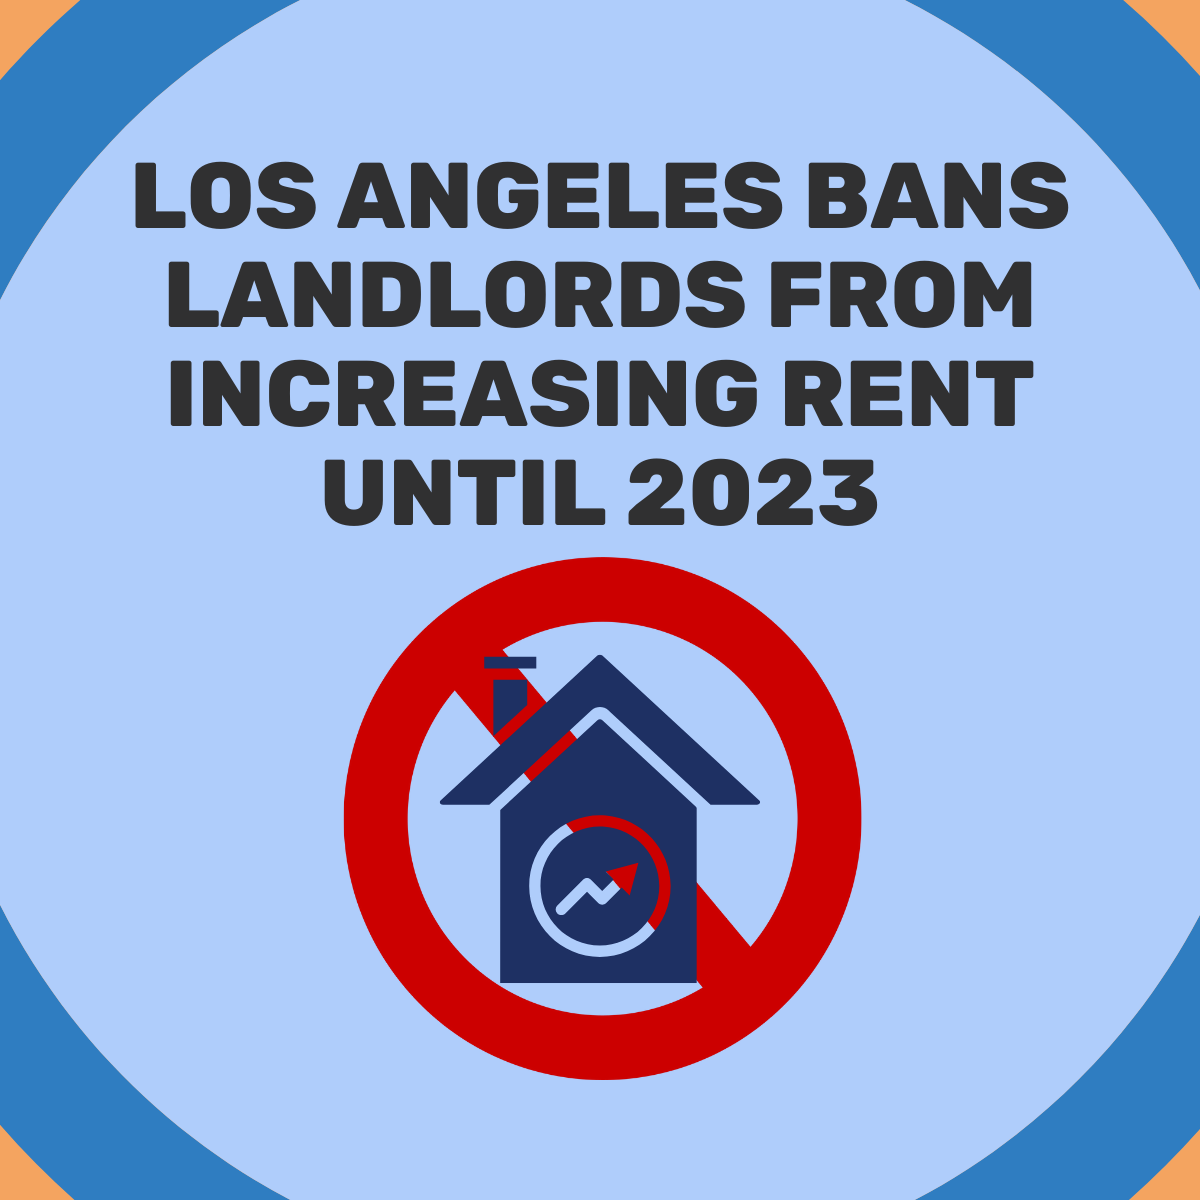 Los Angeles Bans Landlords From Increasing Rent Until 2023